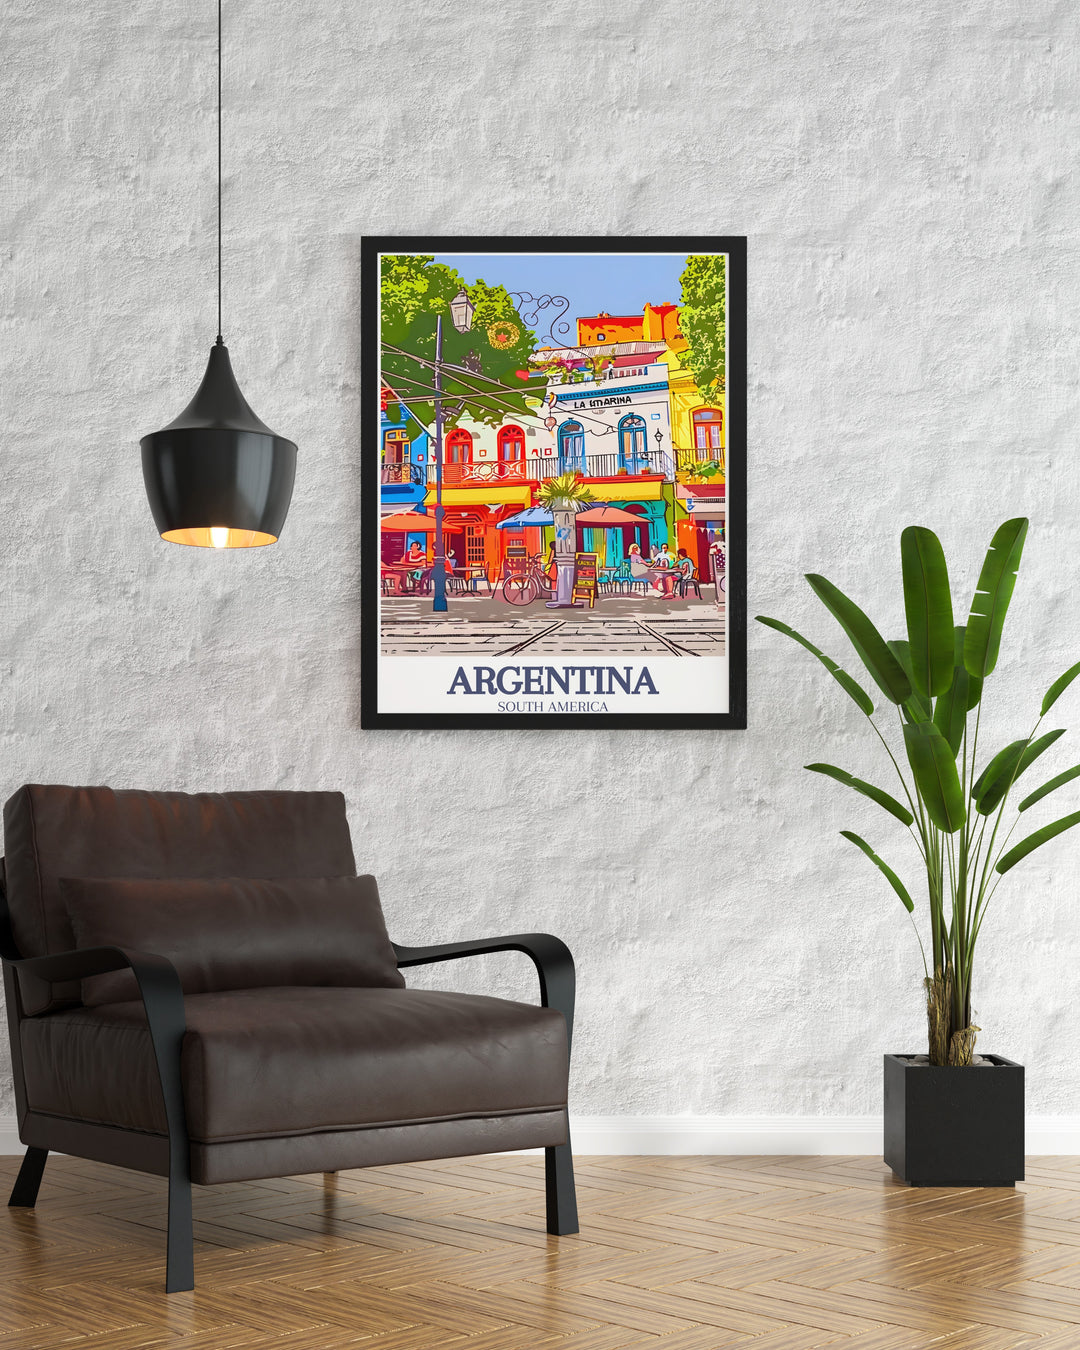 Argentina artwork featuring a stunning Buenos Aires, La Boca scene. This print captures the lively energy and colorful architecture of the neighborhood. Ideal for adding a vibrant touch to any rooms decor.